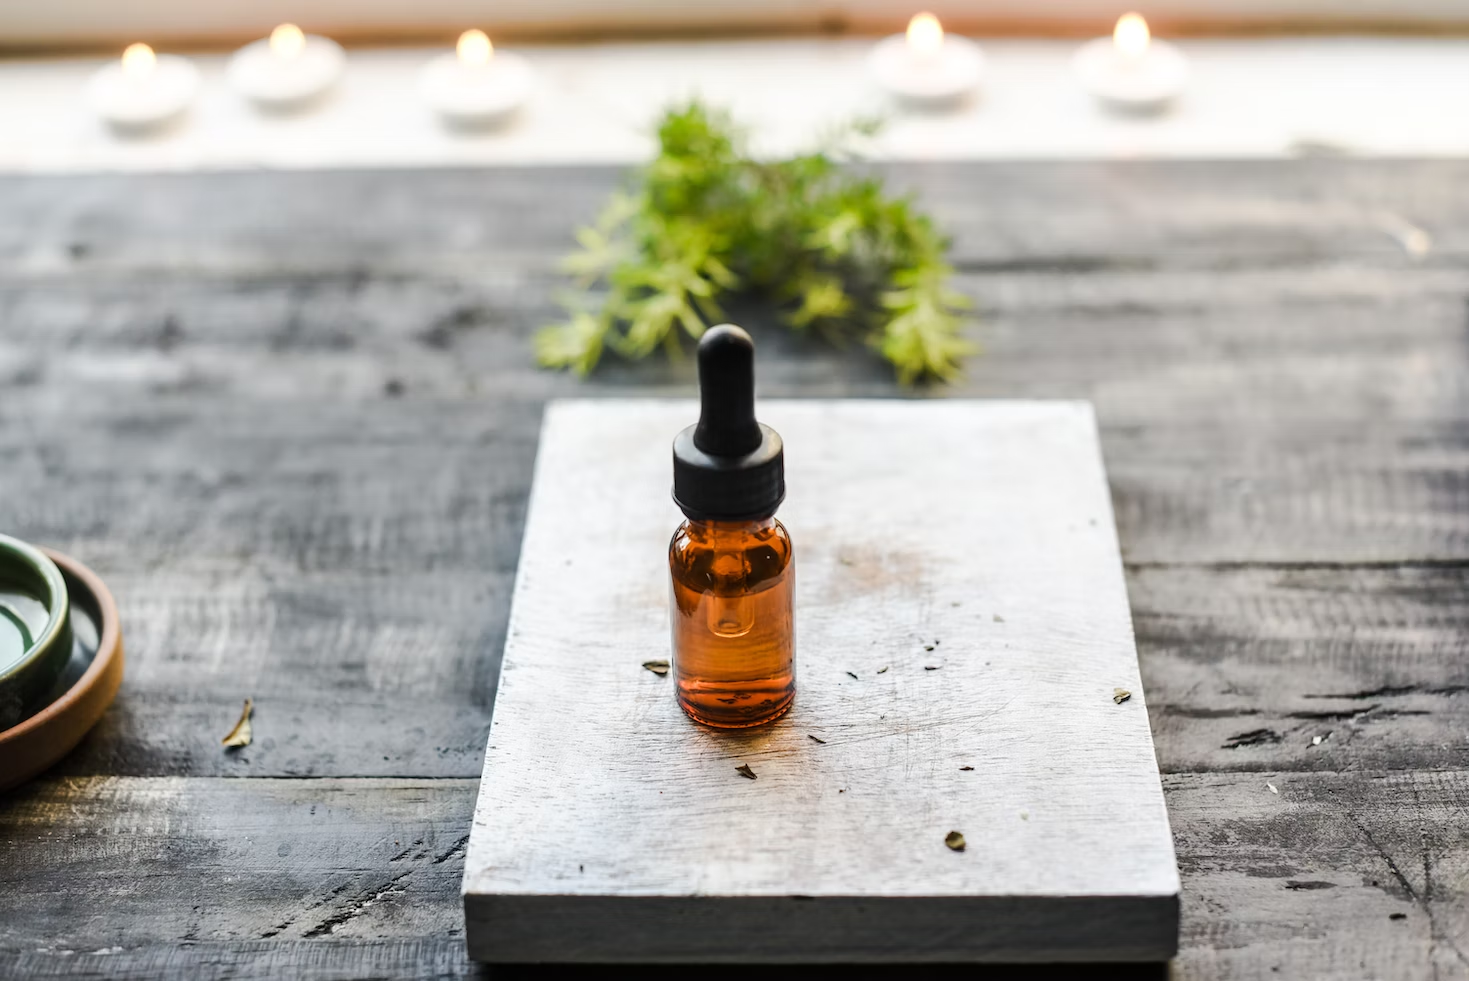 A small brown dropper bottle on a wooden block with plants in the background